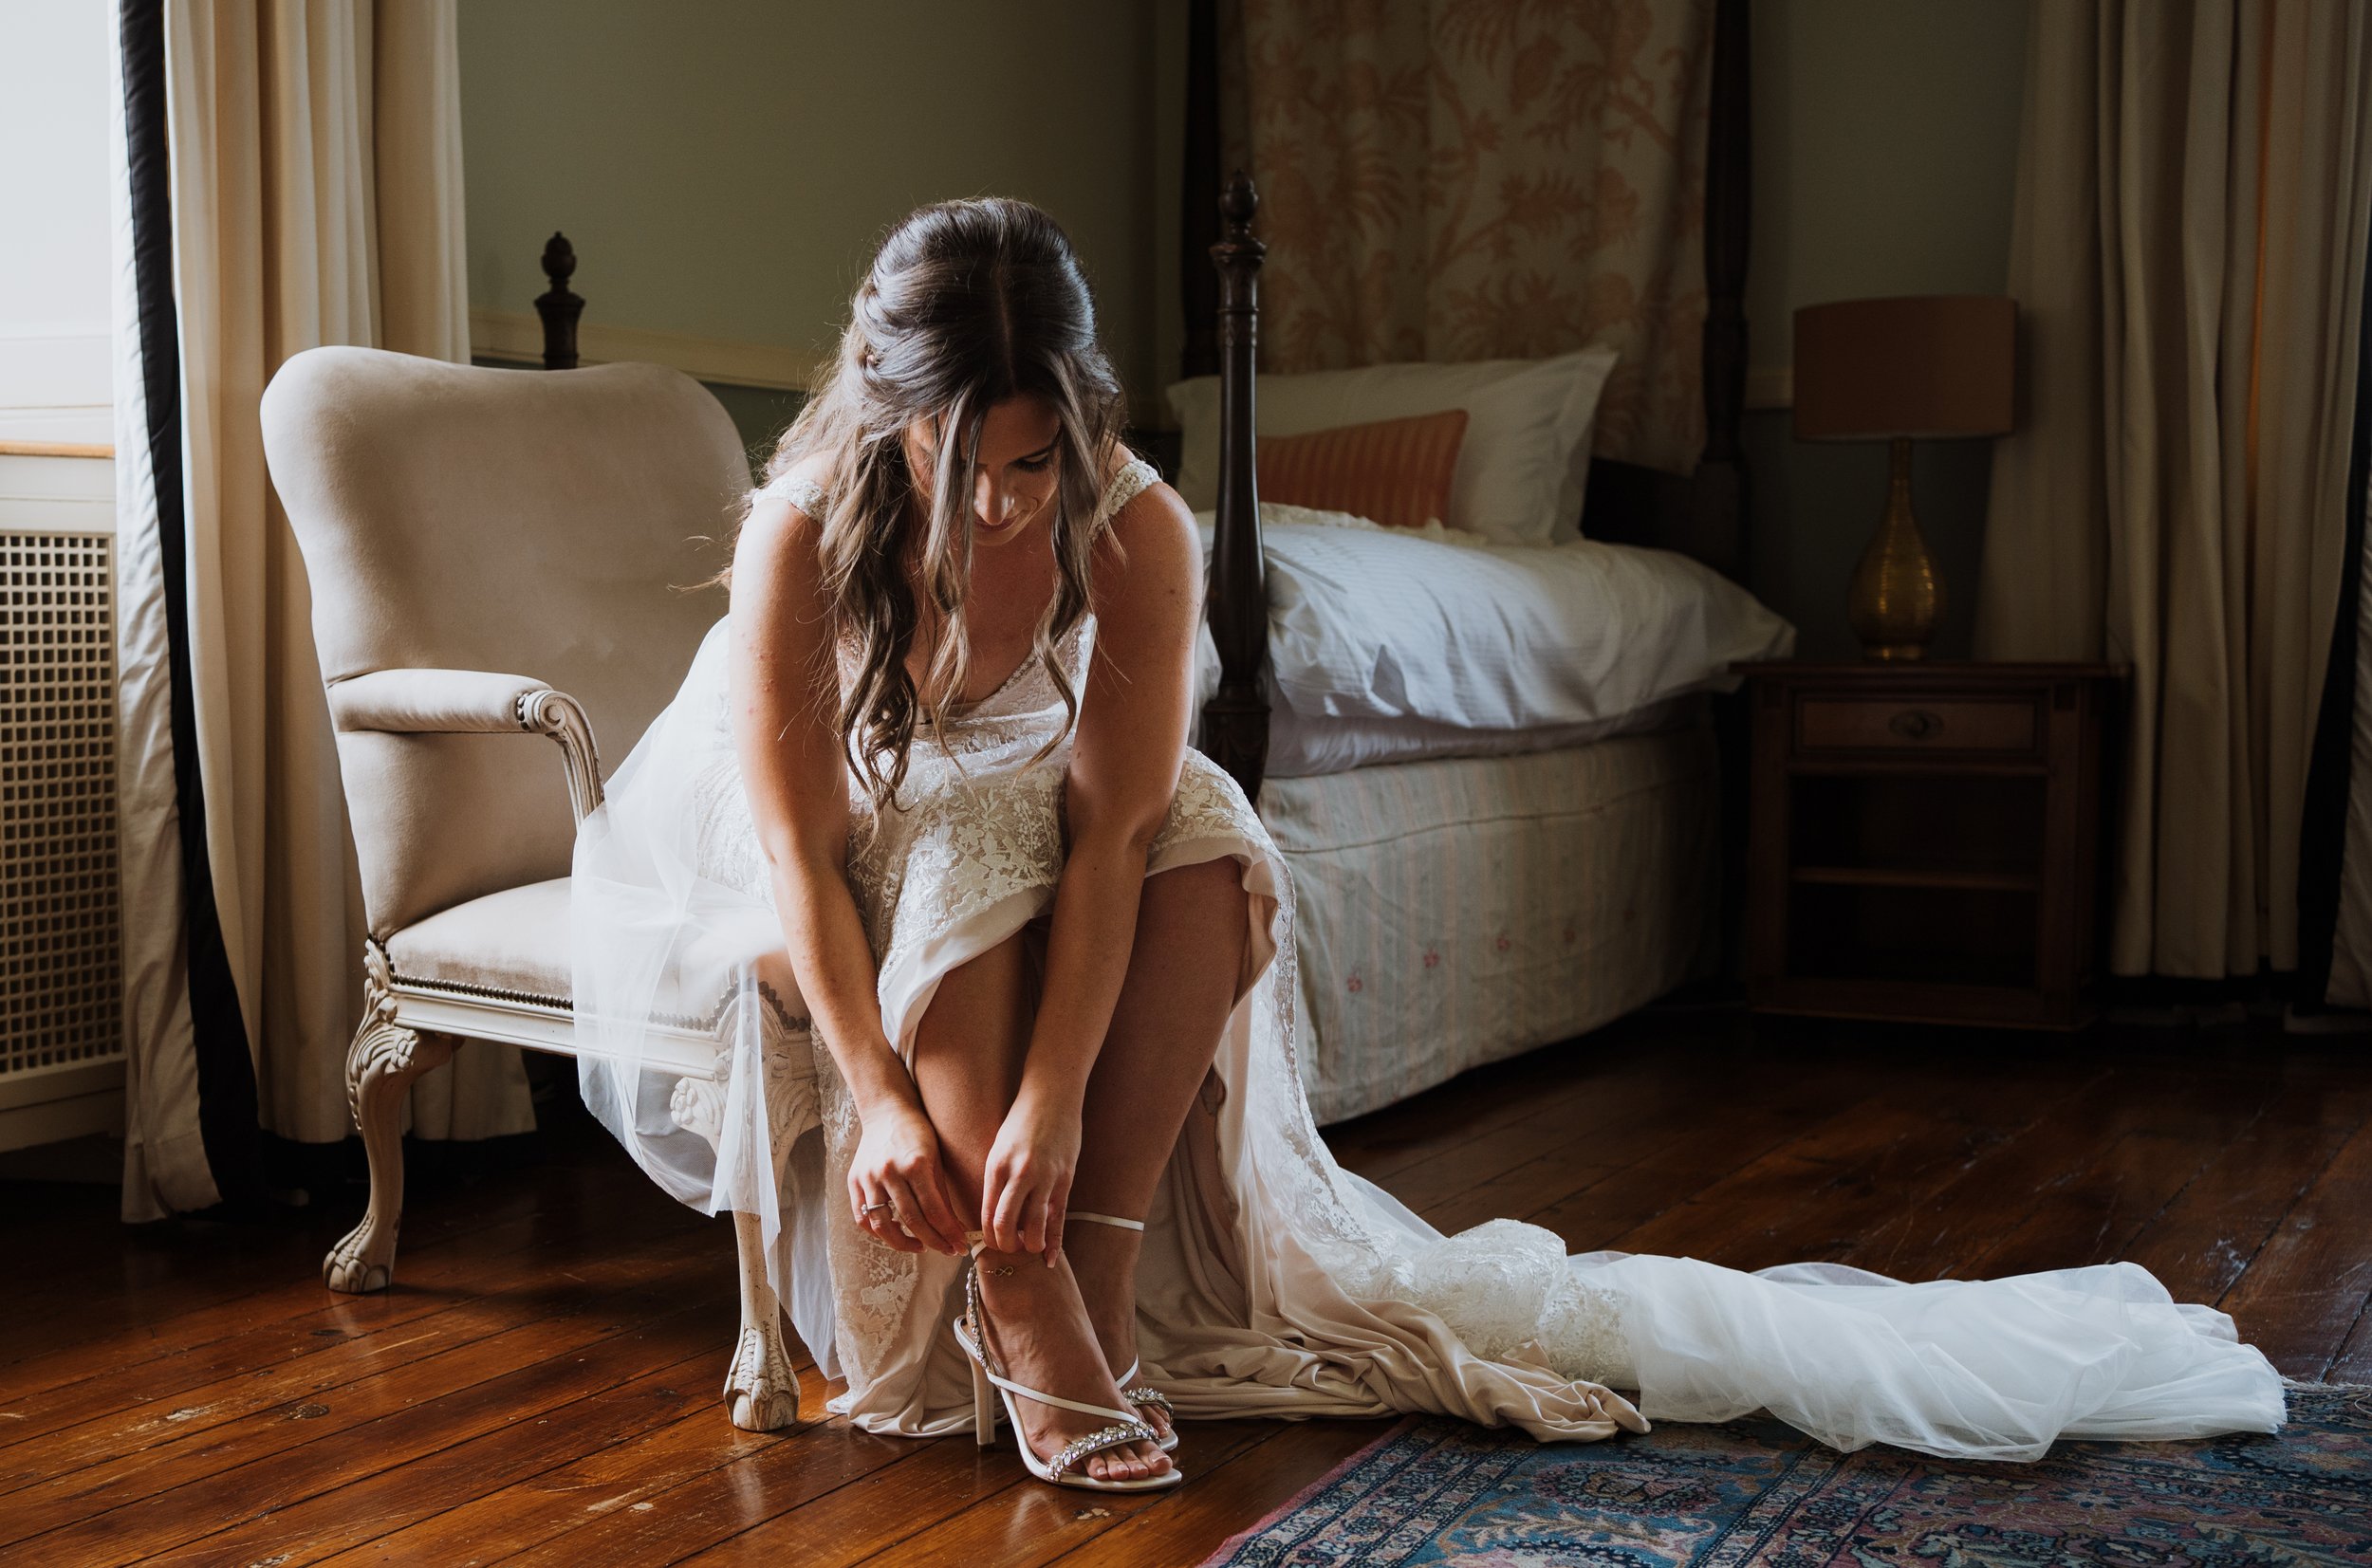 A bride fastening her shoes prior to the wedding ceremony